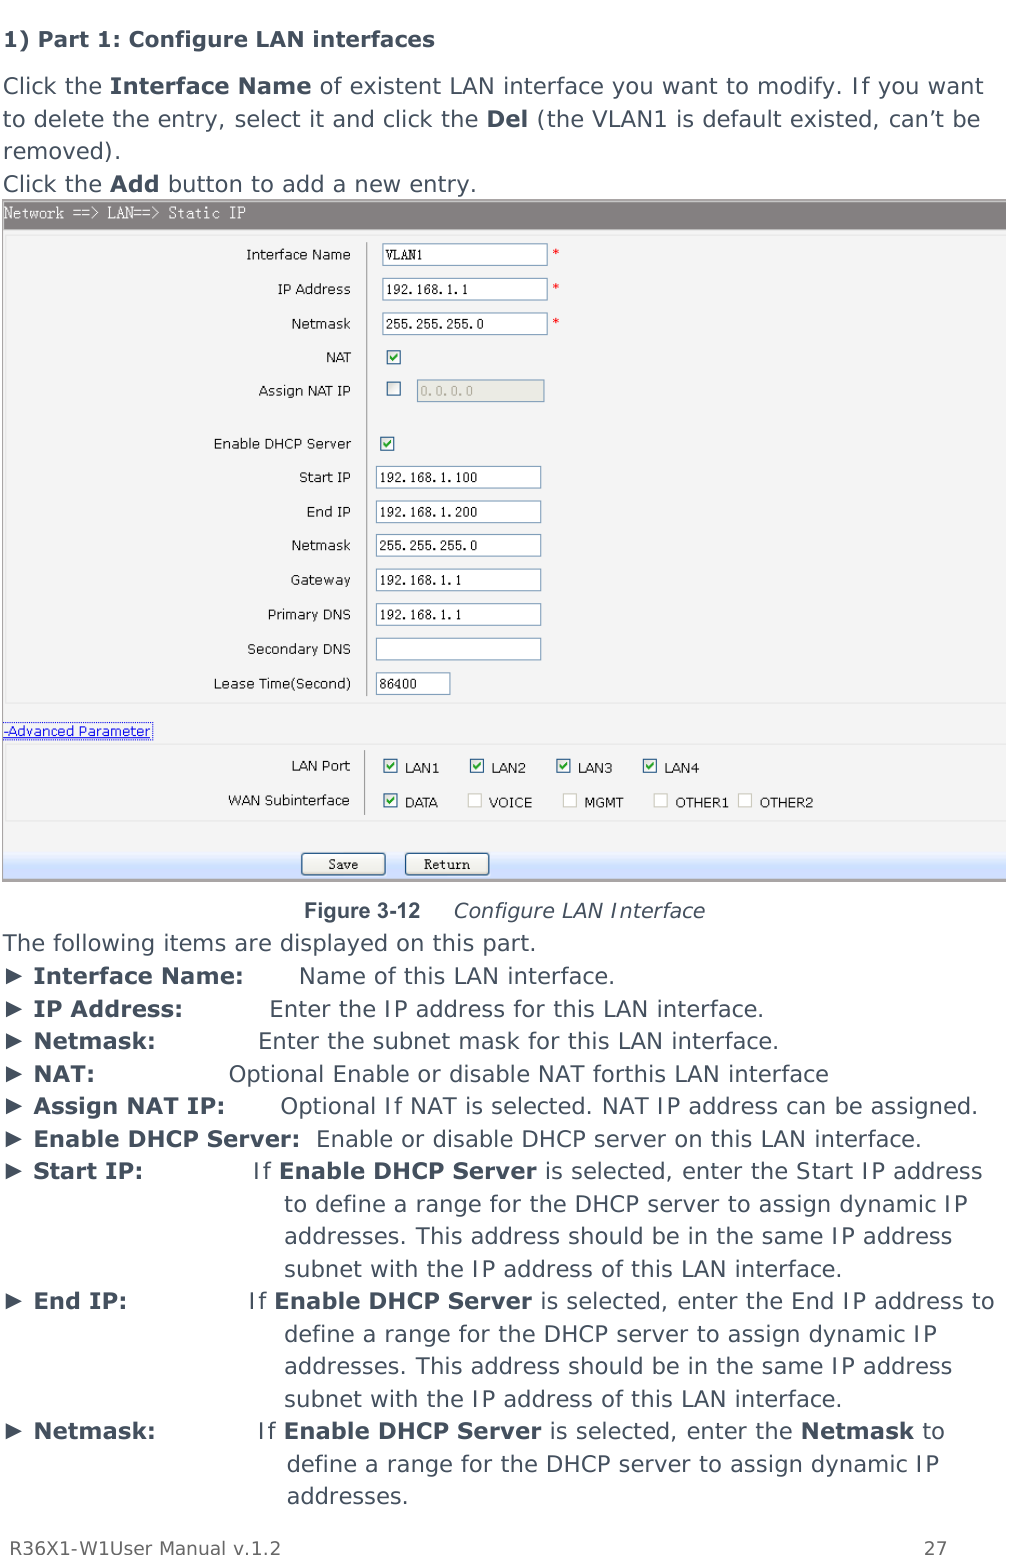           R36X1-W1User Manual v.1.2    27  1) Part 1: Configure LAN interfaces Click the Interface Name of existent LAN interface you want to modify. If you want to delete the entry, select it and click the Del (the VLAN1 is default existed, can’t be removed). Click the Add button to add a new entry.  Figure 3-12  Configure LAN Interface The following items are displayed on this part. ► Interface Name:       Name of this LAN interface. ► IP Address:           Enter the IP address for this LAN interface. ► Netmask:             Enter the subnet mask for this LAN interface. ► NAT:                 Optional Enable or disable NAT forthis LAN interface ► Assign NAT IP:       Optional If NAT is selected. NAT IP address can be assigned. ► Enable DHCP Server:  Enable or disable DHCP server on this LAN interface. ► Start IP:              If Enable DHCP Server is selected, enter the Start IP address to define a range for the DHCP server to assign dynamic IP addresses. This address should be in the same IP address subnet with the IP address of this LAN interface. ► End IP:               If Enable DHCP Server is selected, enter the End IP address to define a range for the DHCP server to assign dynamic IP addresses. This address should be in the same IP address subnet with the IP address of this LAN interface. ► Netmask:             If Enable DHCP Server is selected, enter the Netmask to define a range for the DHCP server to assign dynamic IP addresses. 